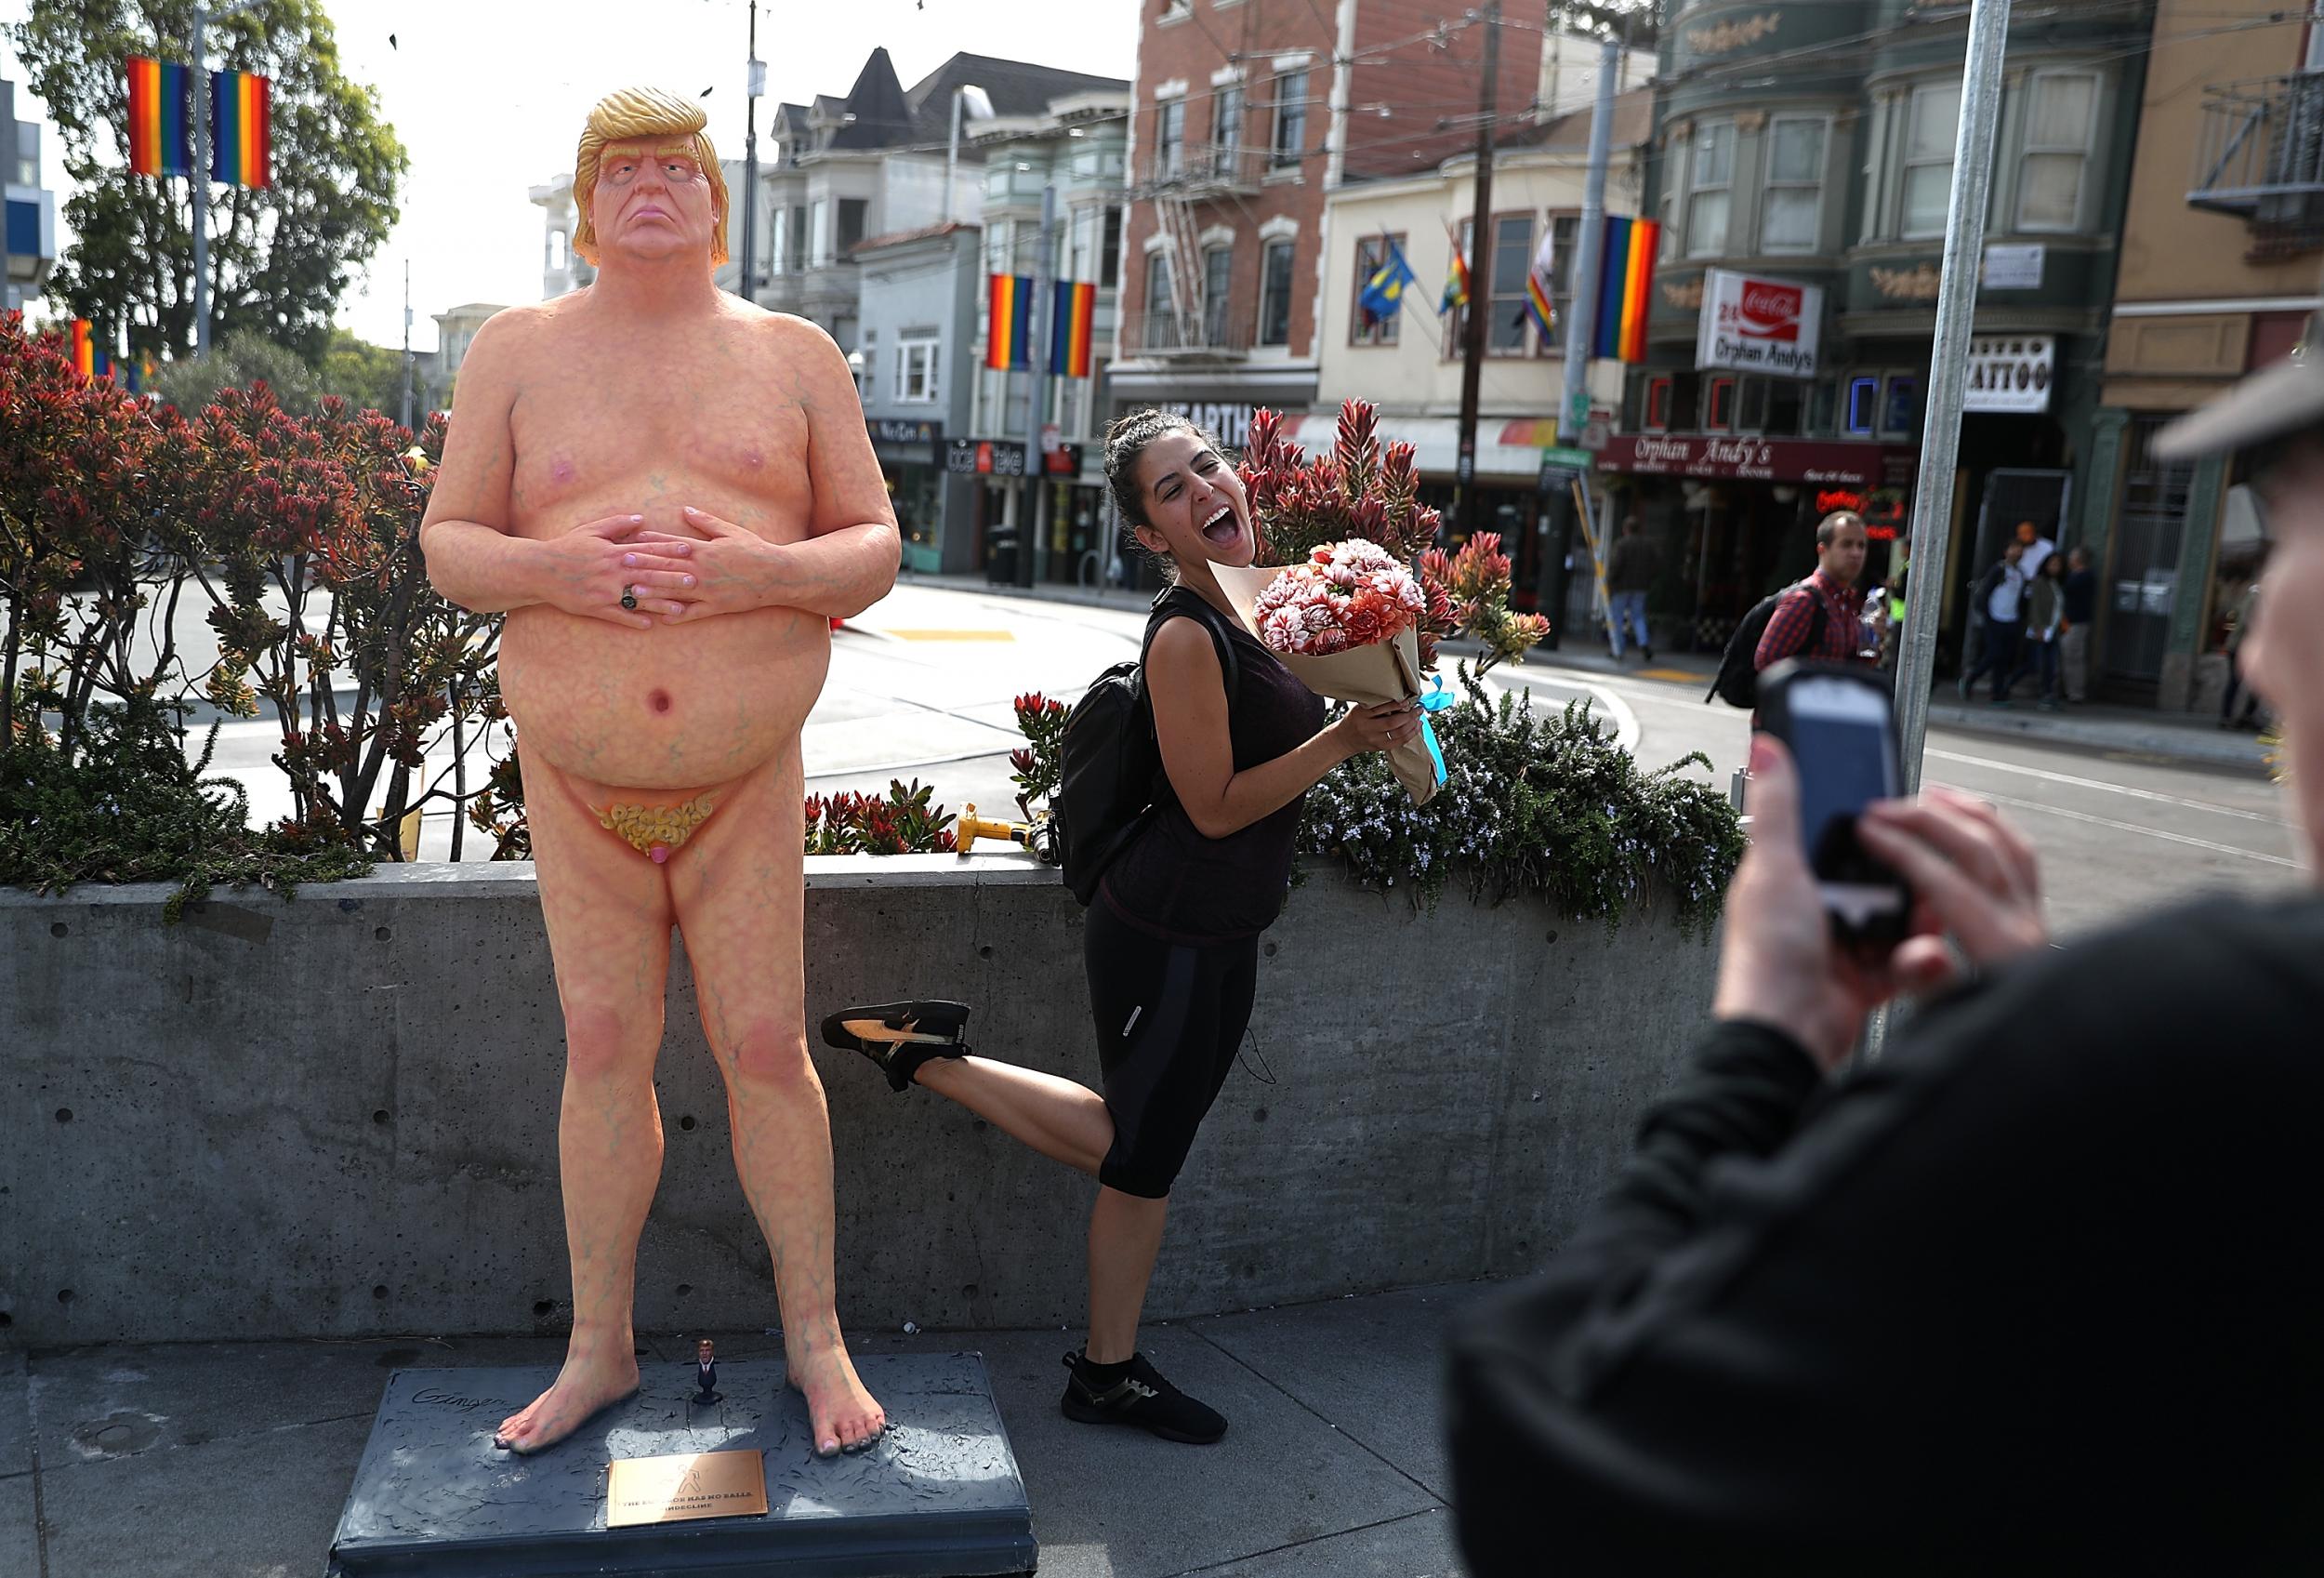 The statue, which sports an oversized rotund belly has just been sold for a whopping £18,000 at an auction by a mystery buyer